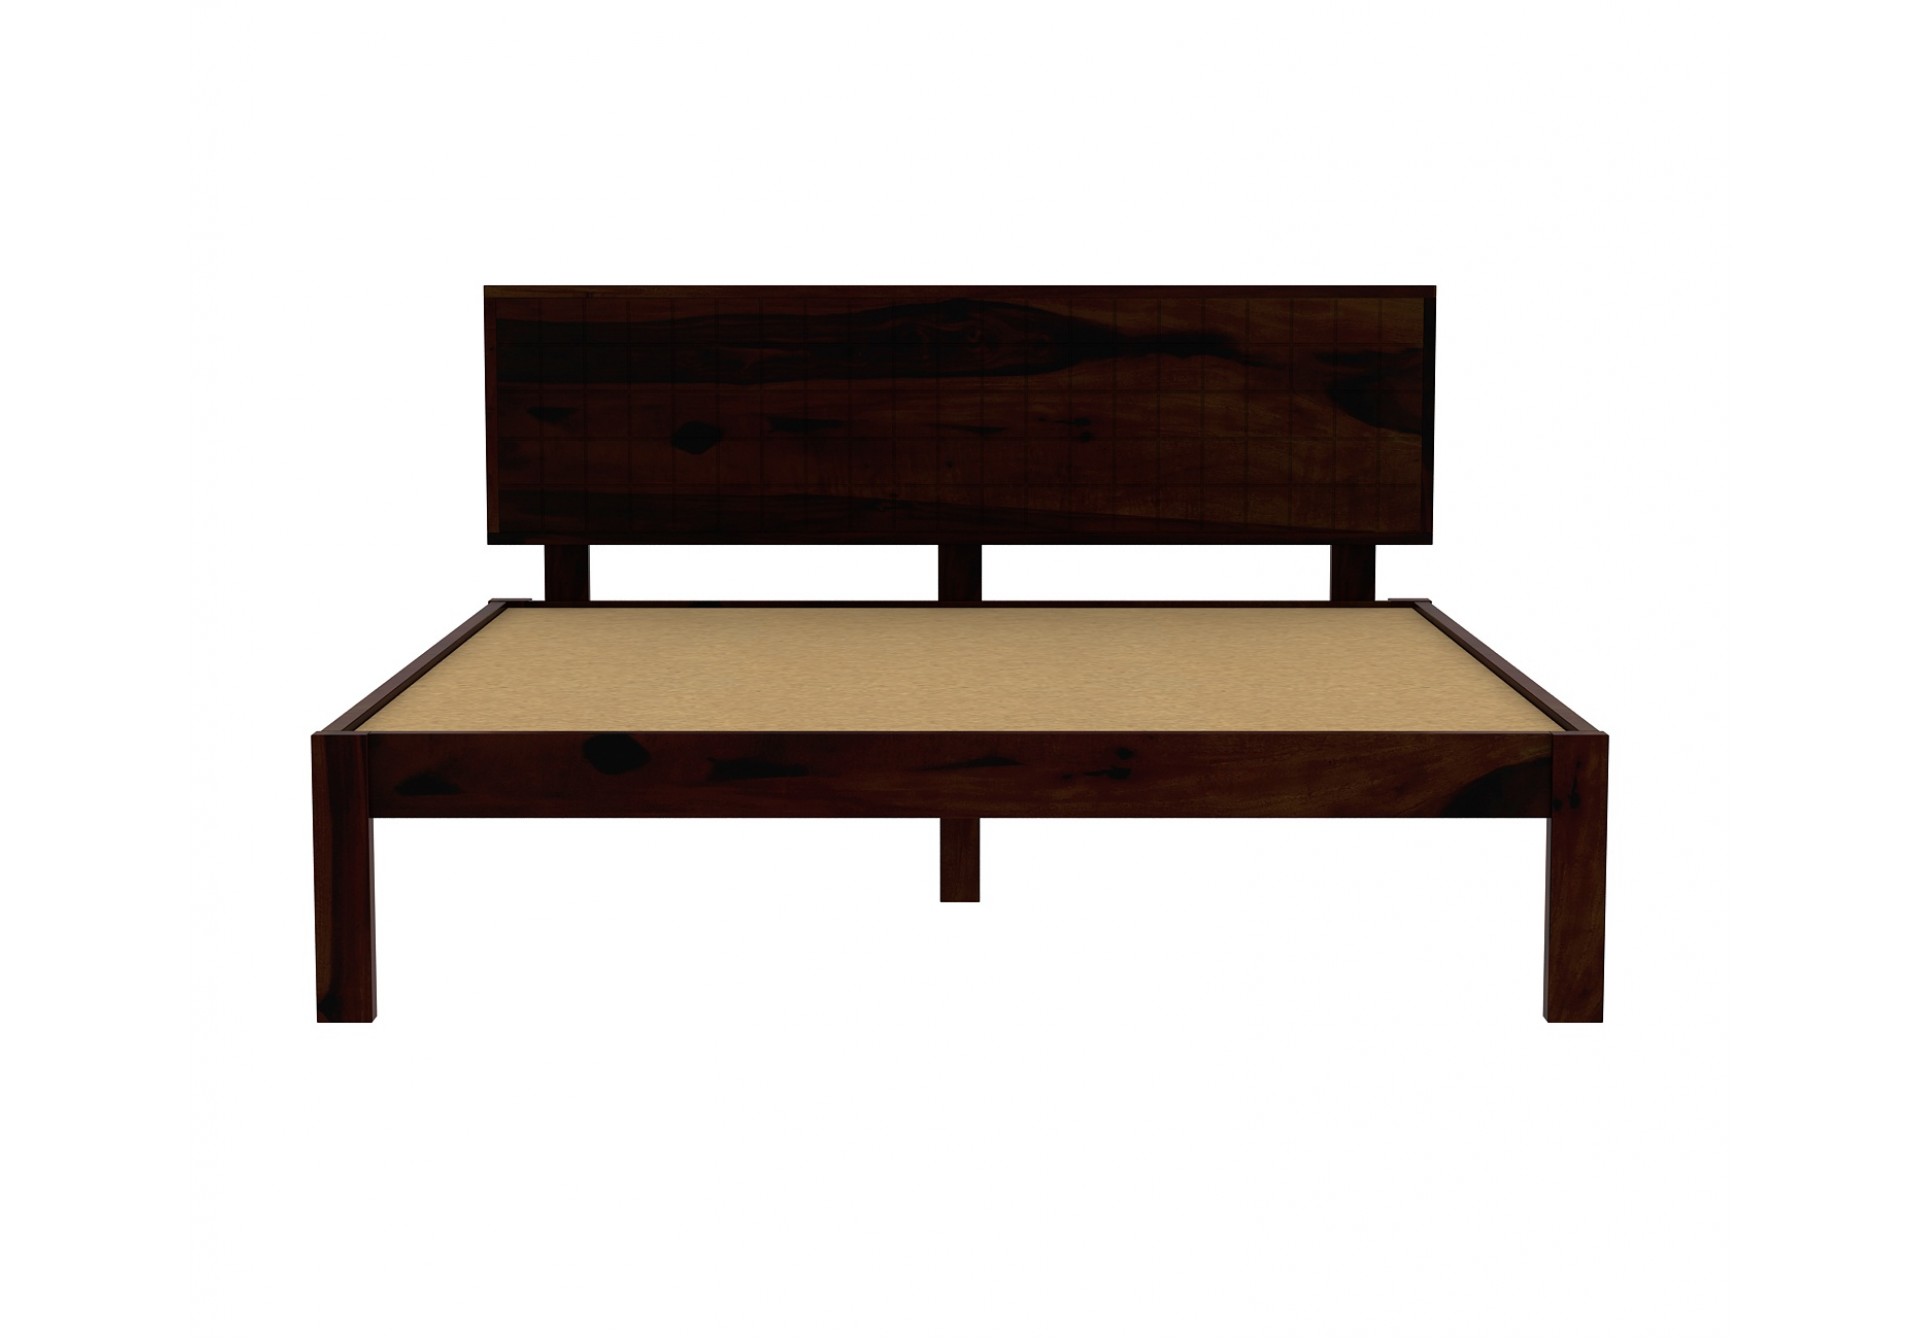 Solic Wooden Bed Without storage Queen Size (Walnut Finish)